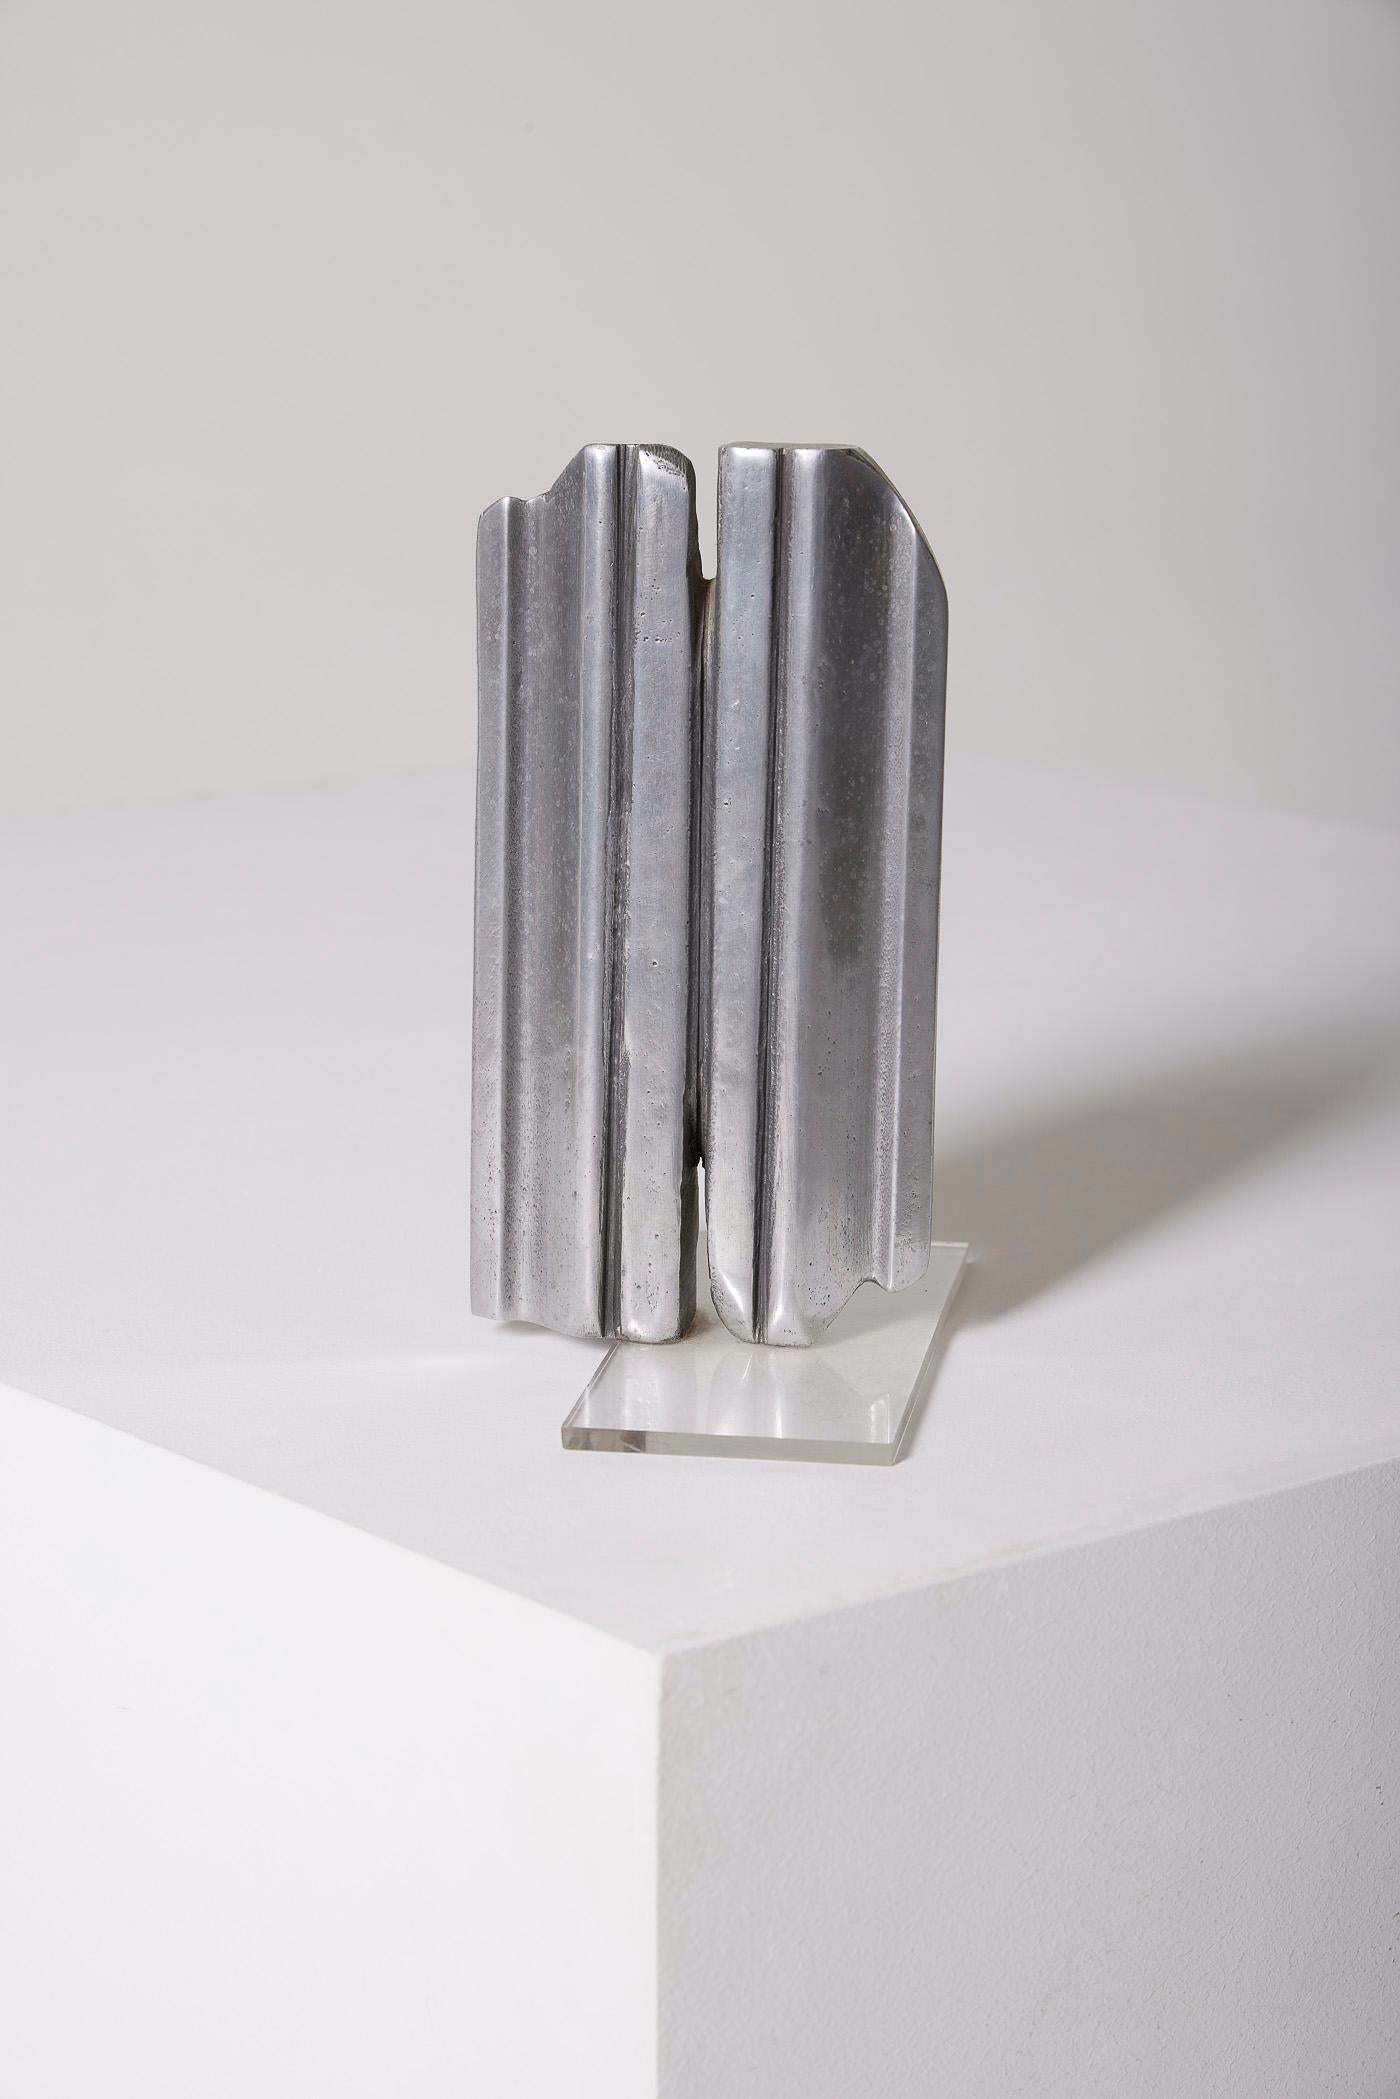 Free-form modernist sculpture in brushed metal resting on a lucite base. In perfect condition.
LP2599